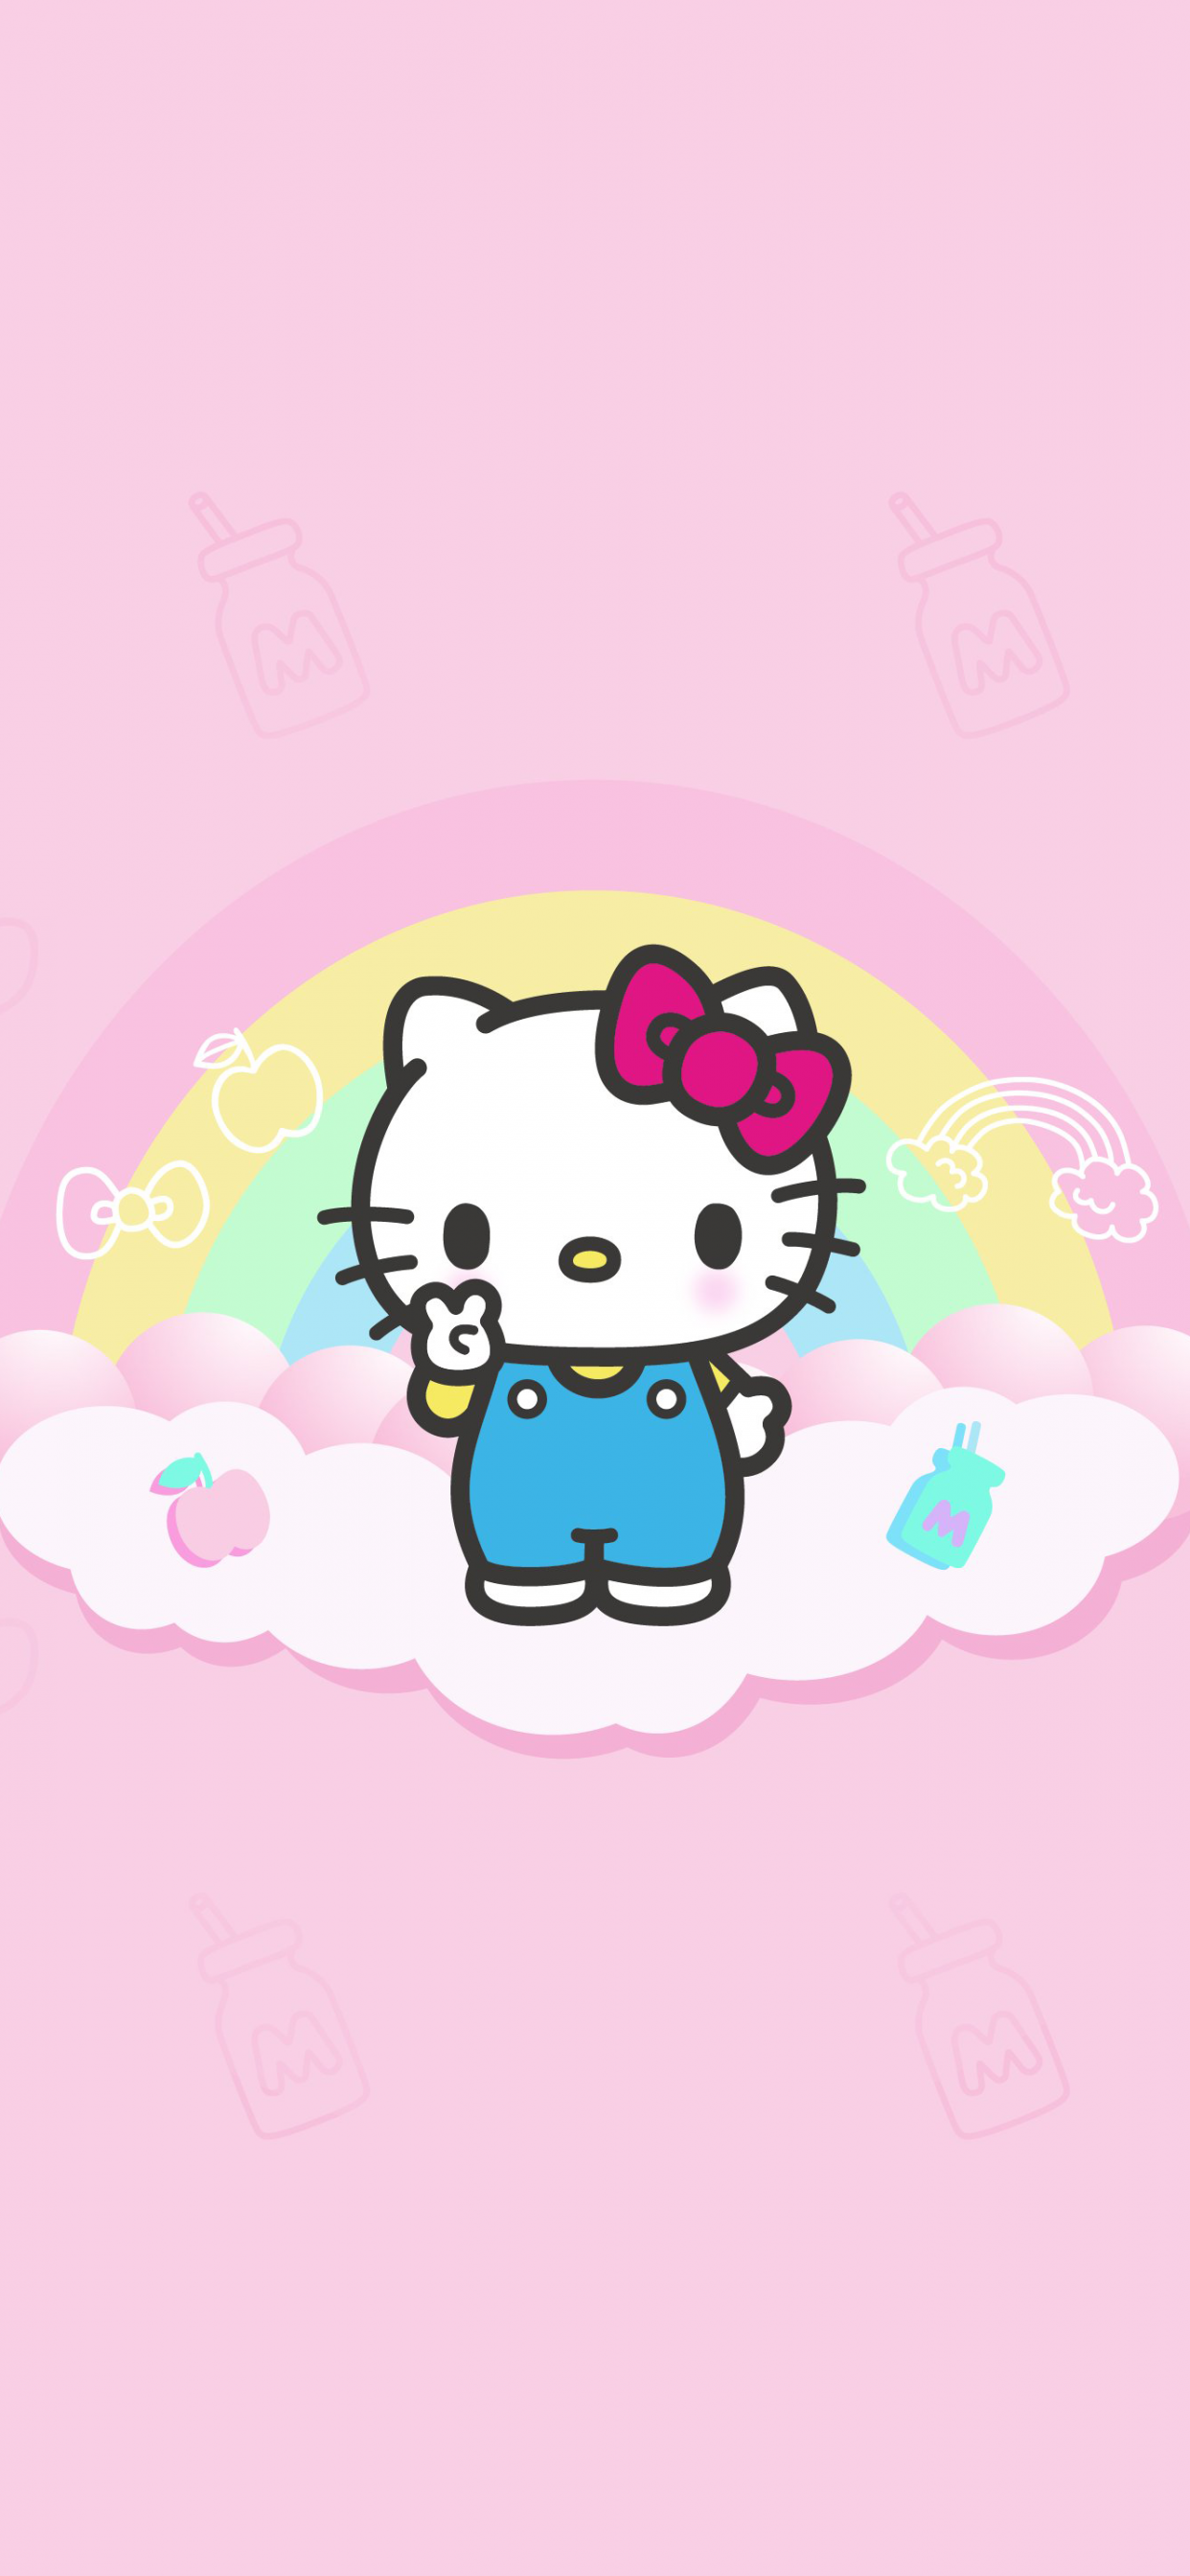 20 Cute Hello Kitty Wallpaper Ideas  Aesthetic Heart Background  Idea  Wallpapers  iPhone WallpapersColor Schemes